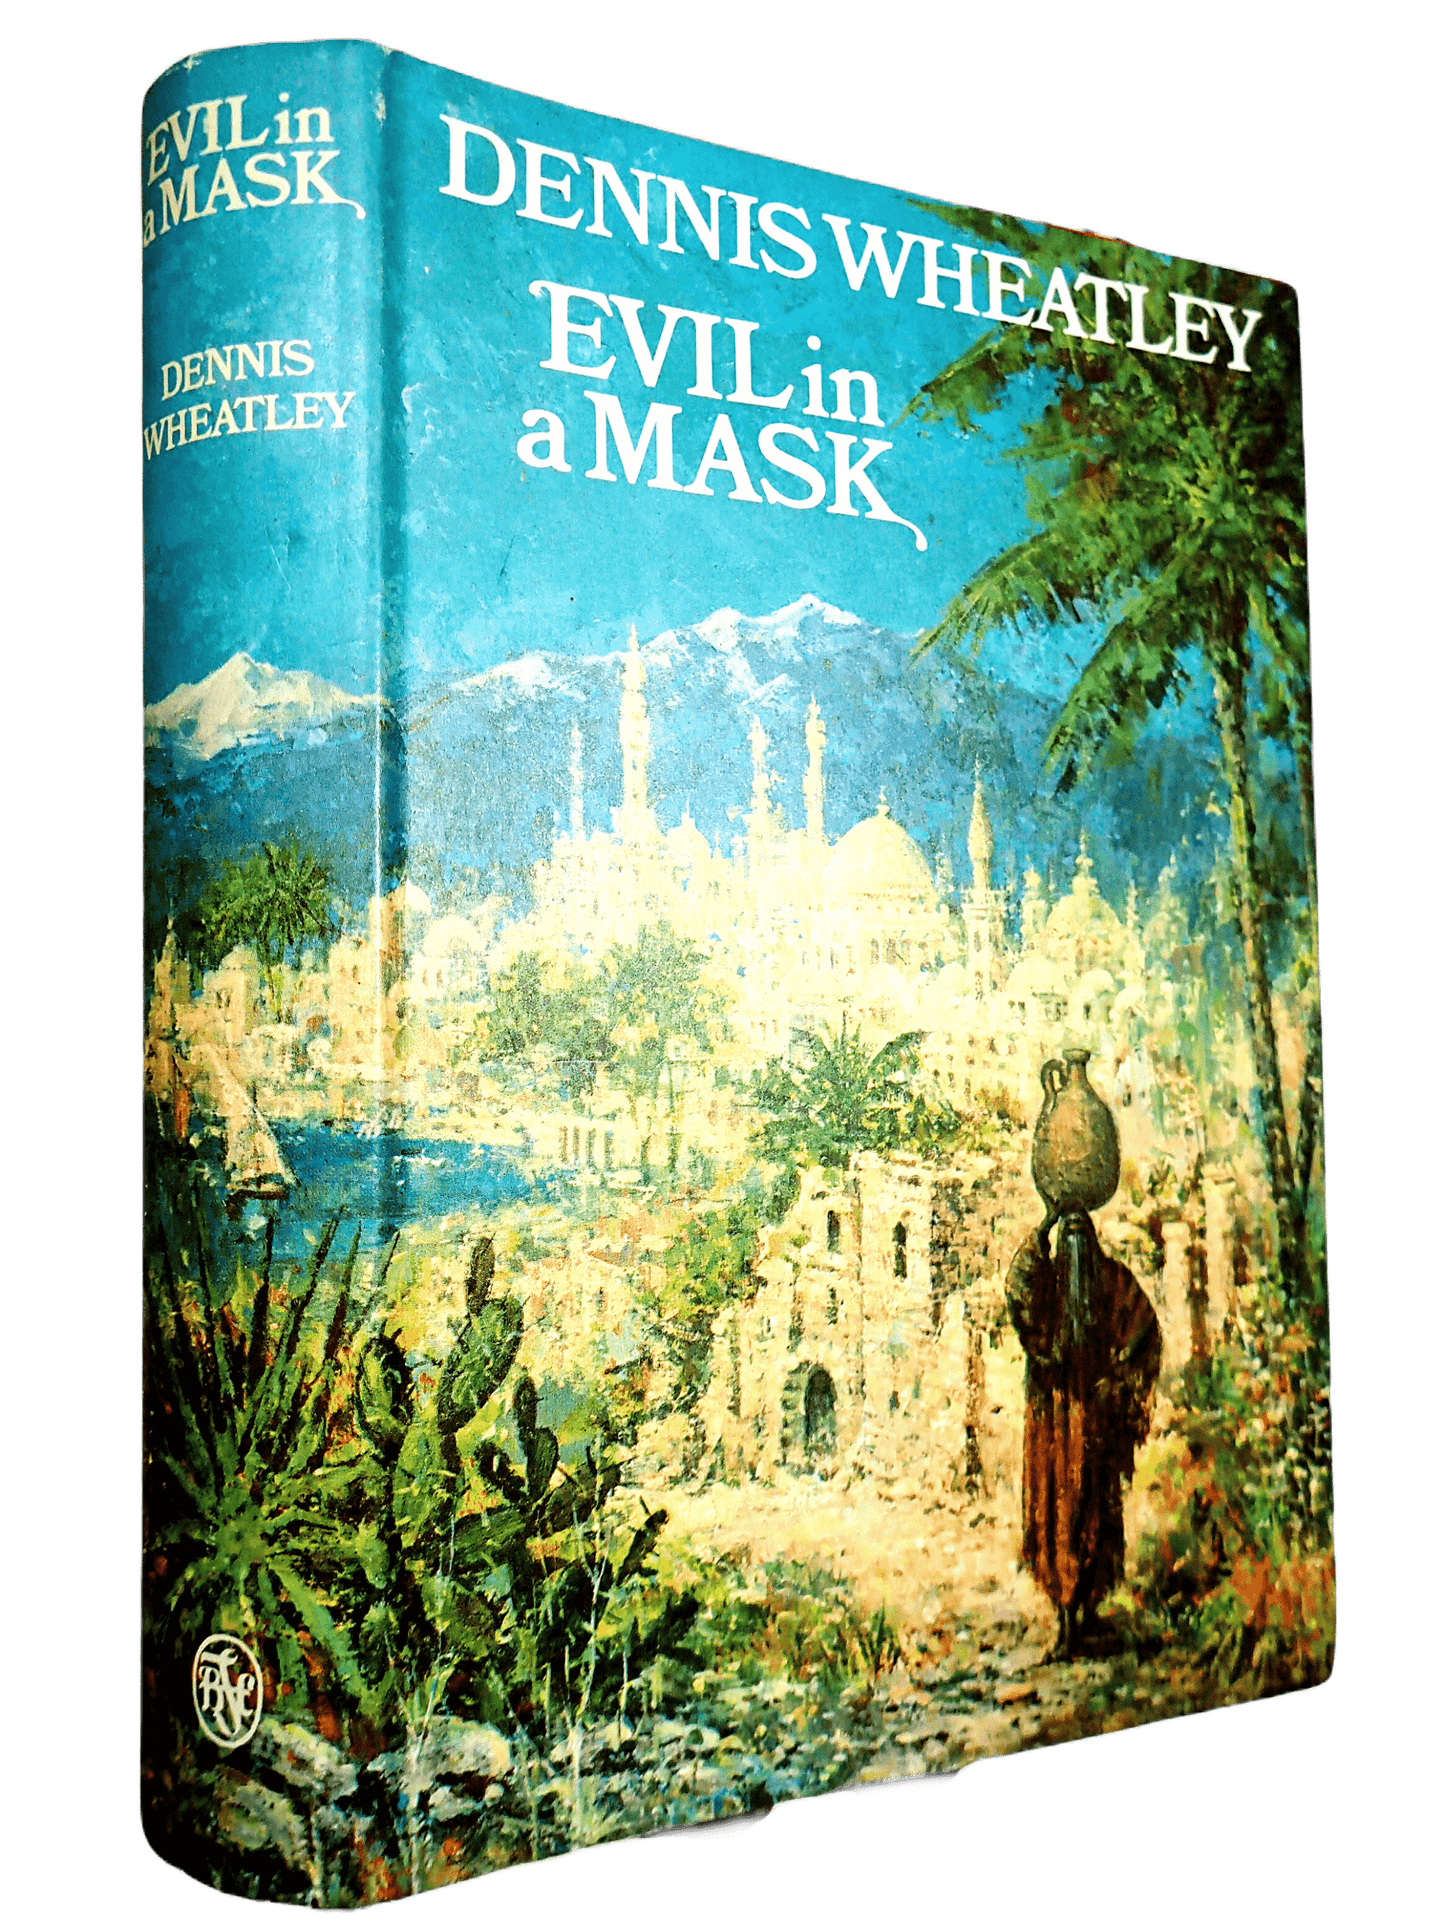 Front cover of Evil in a Mask Dennis Wheatley Vintage Book BCA 1960's Showing a figure walking against an eastern landscape. 